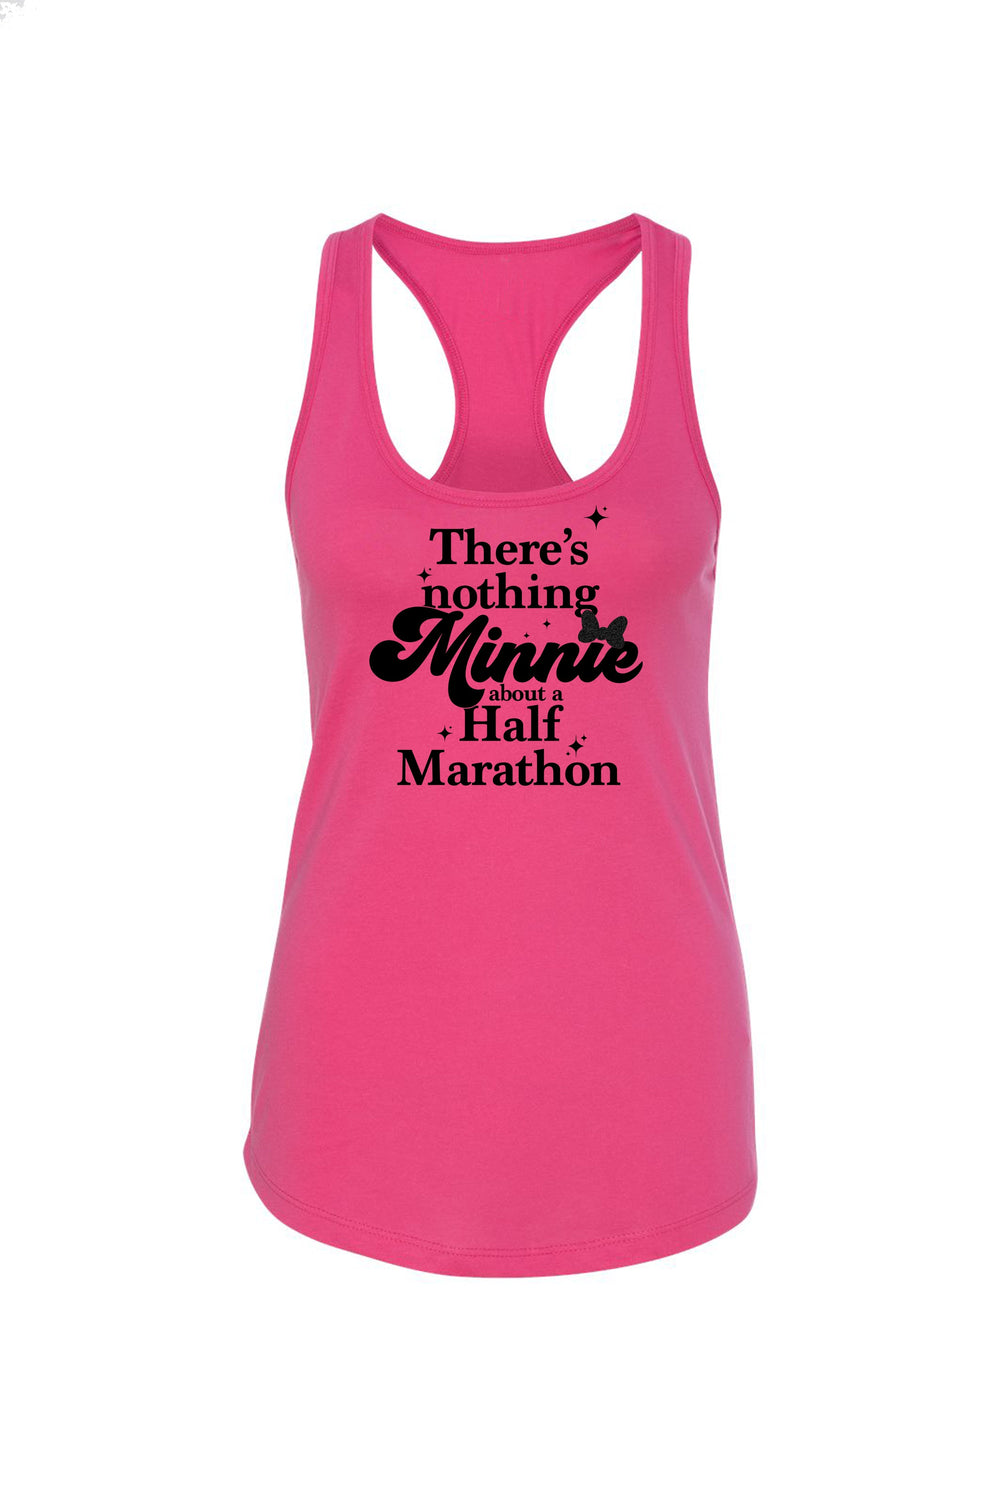 Sarah Marie Design Studio Women's Tank Pink / XSmall There's nothing Minnie about a Half RunDisney Racerback Tank